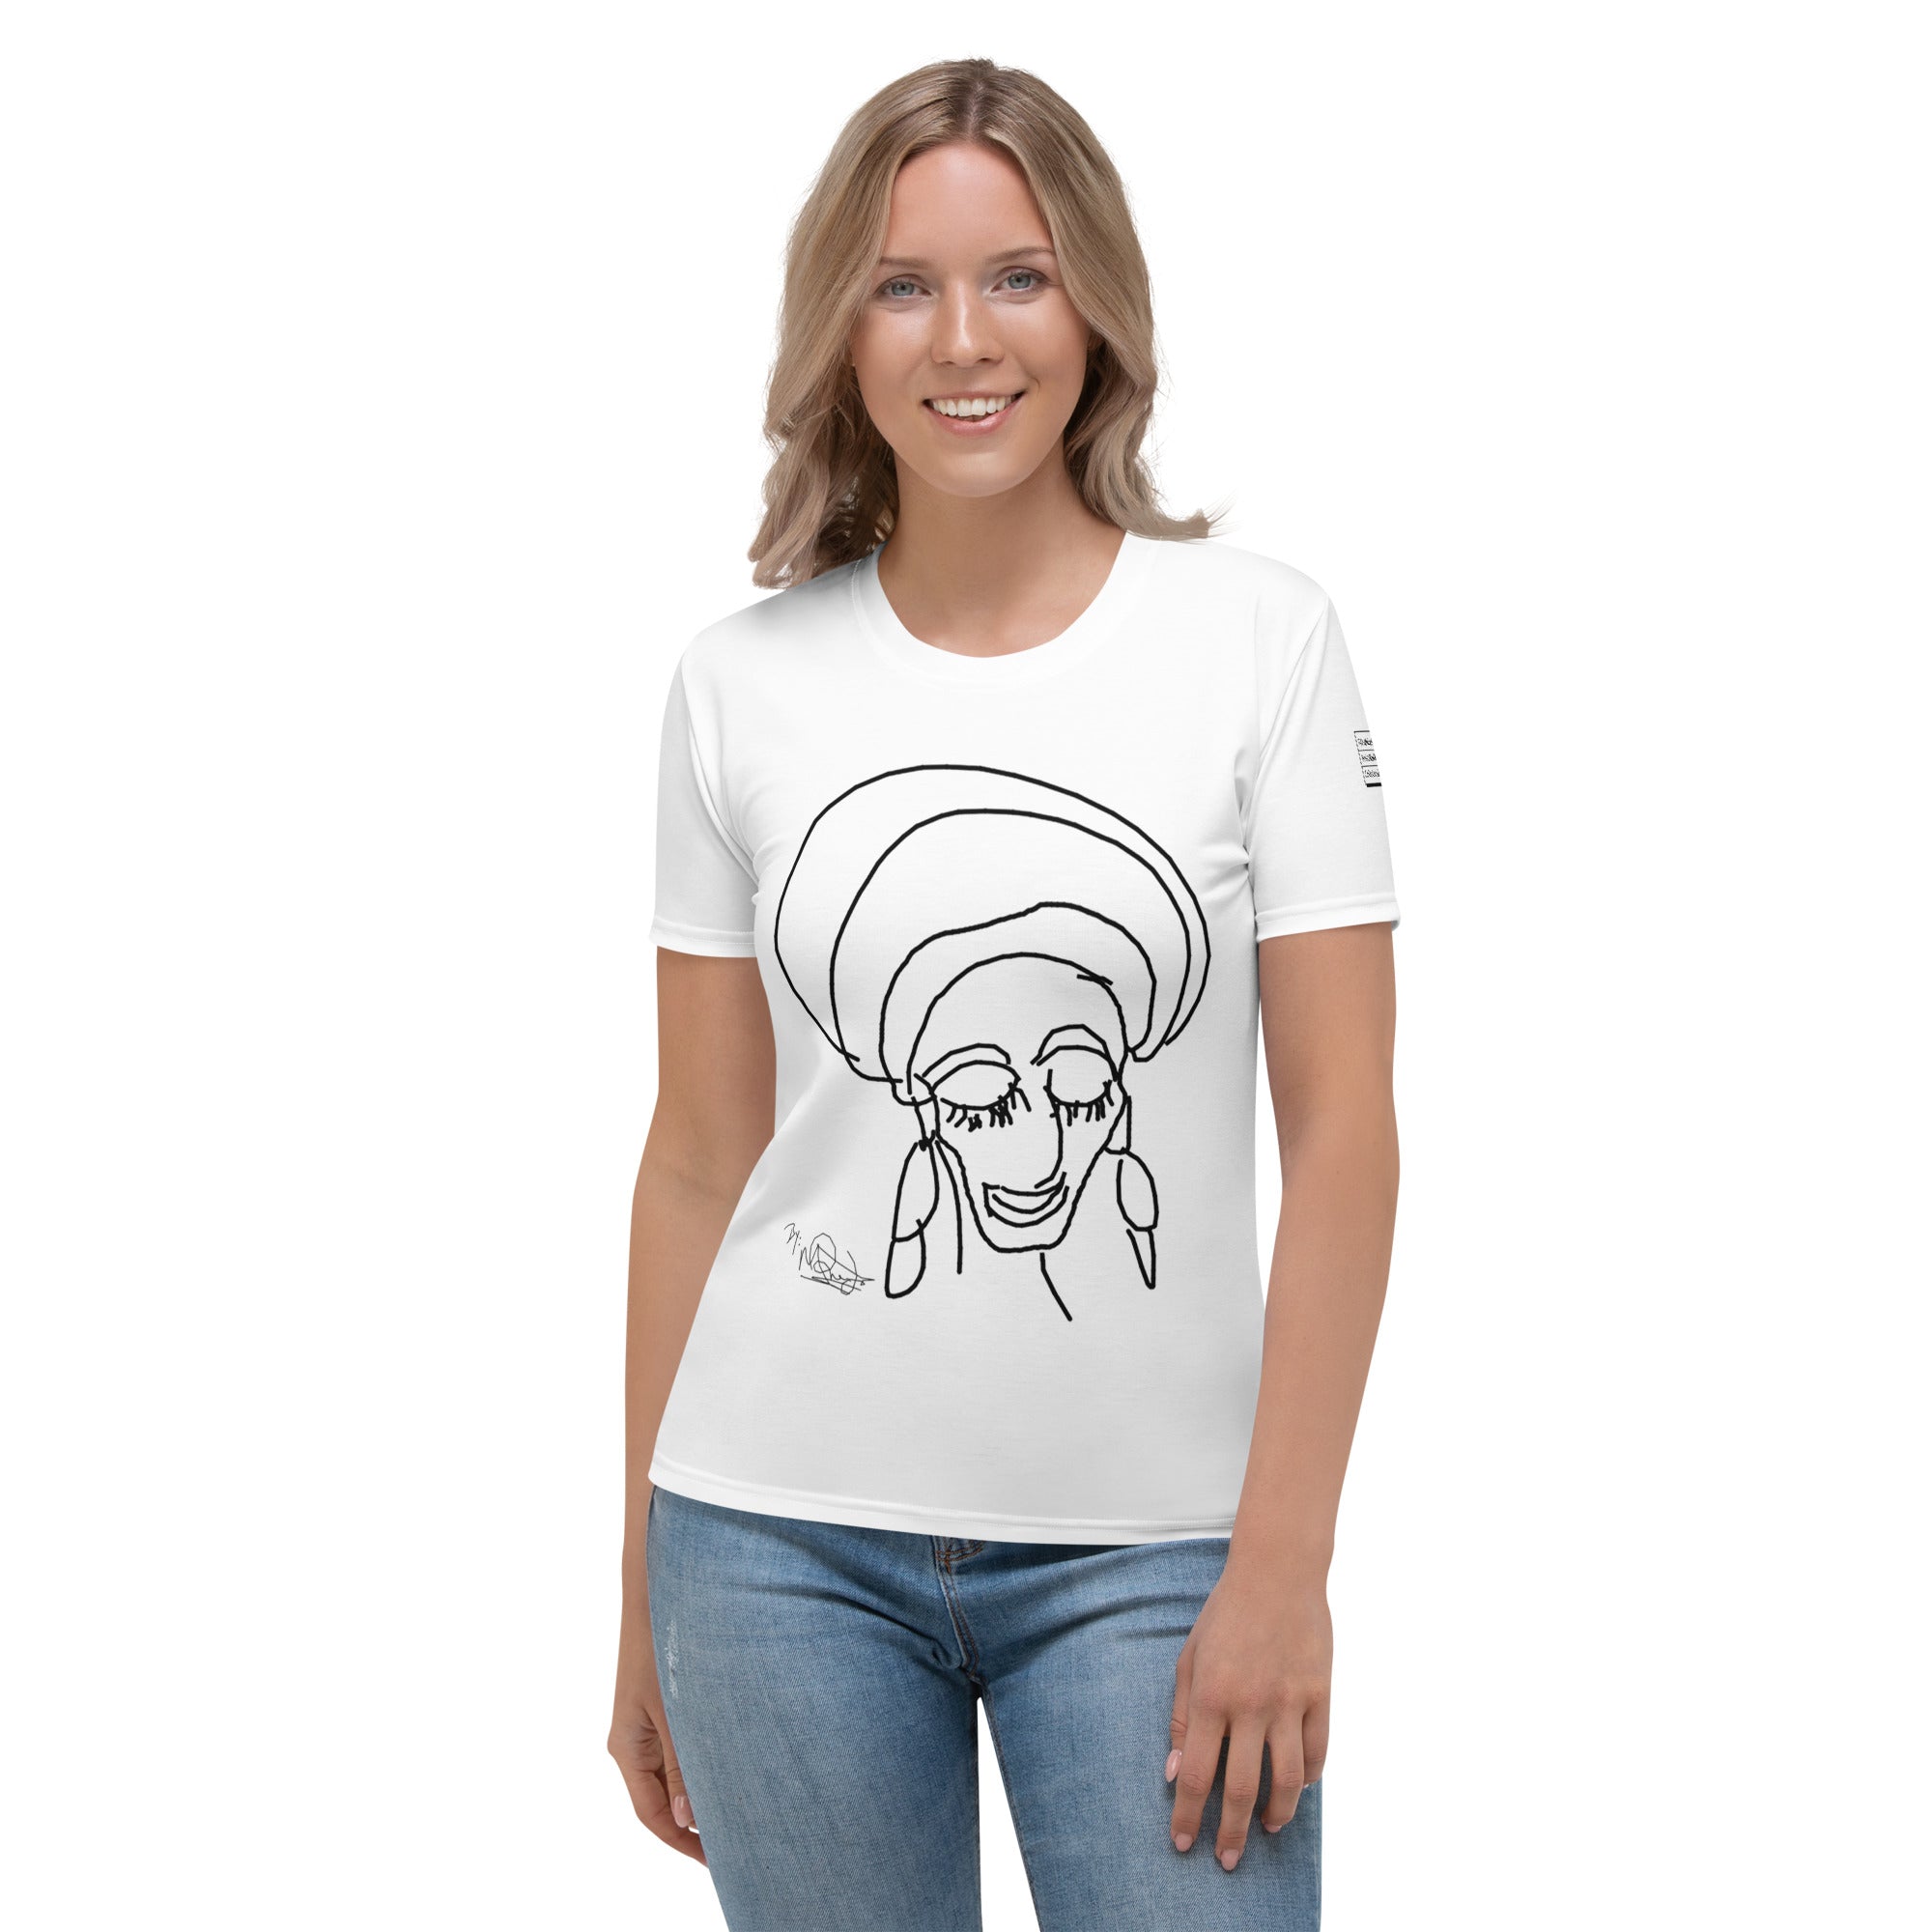 Maxi Priest - Limited Edition Art "African Woman" - Women's T-shirt